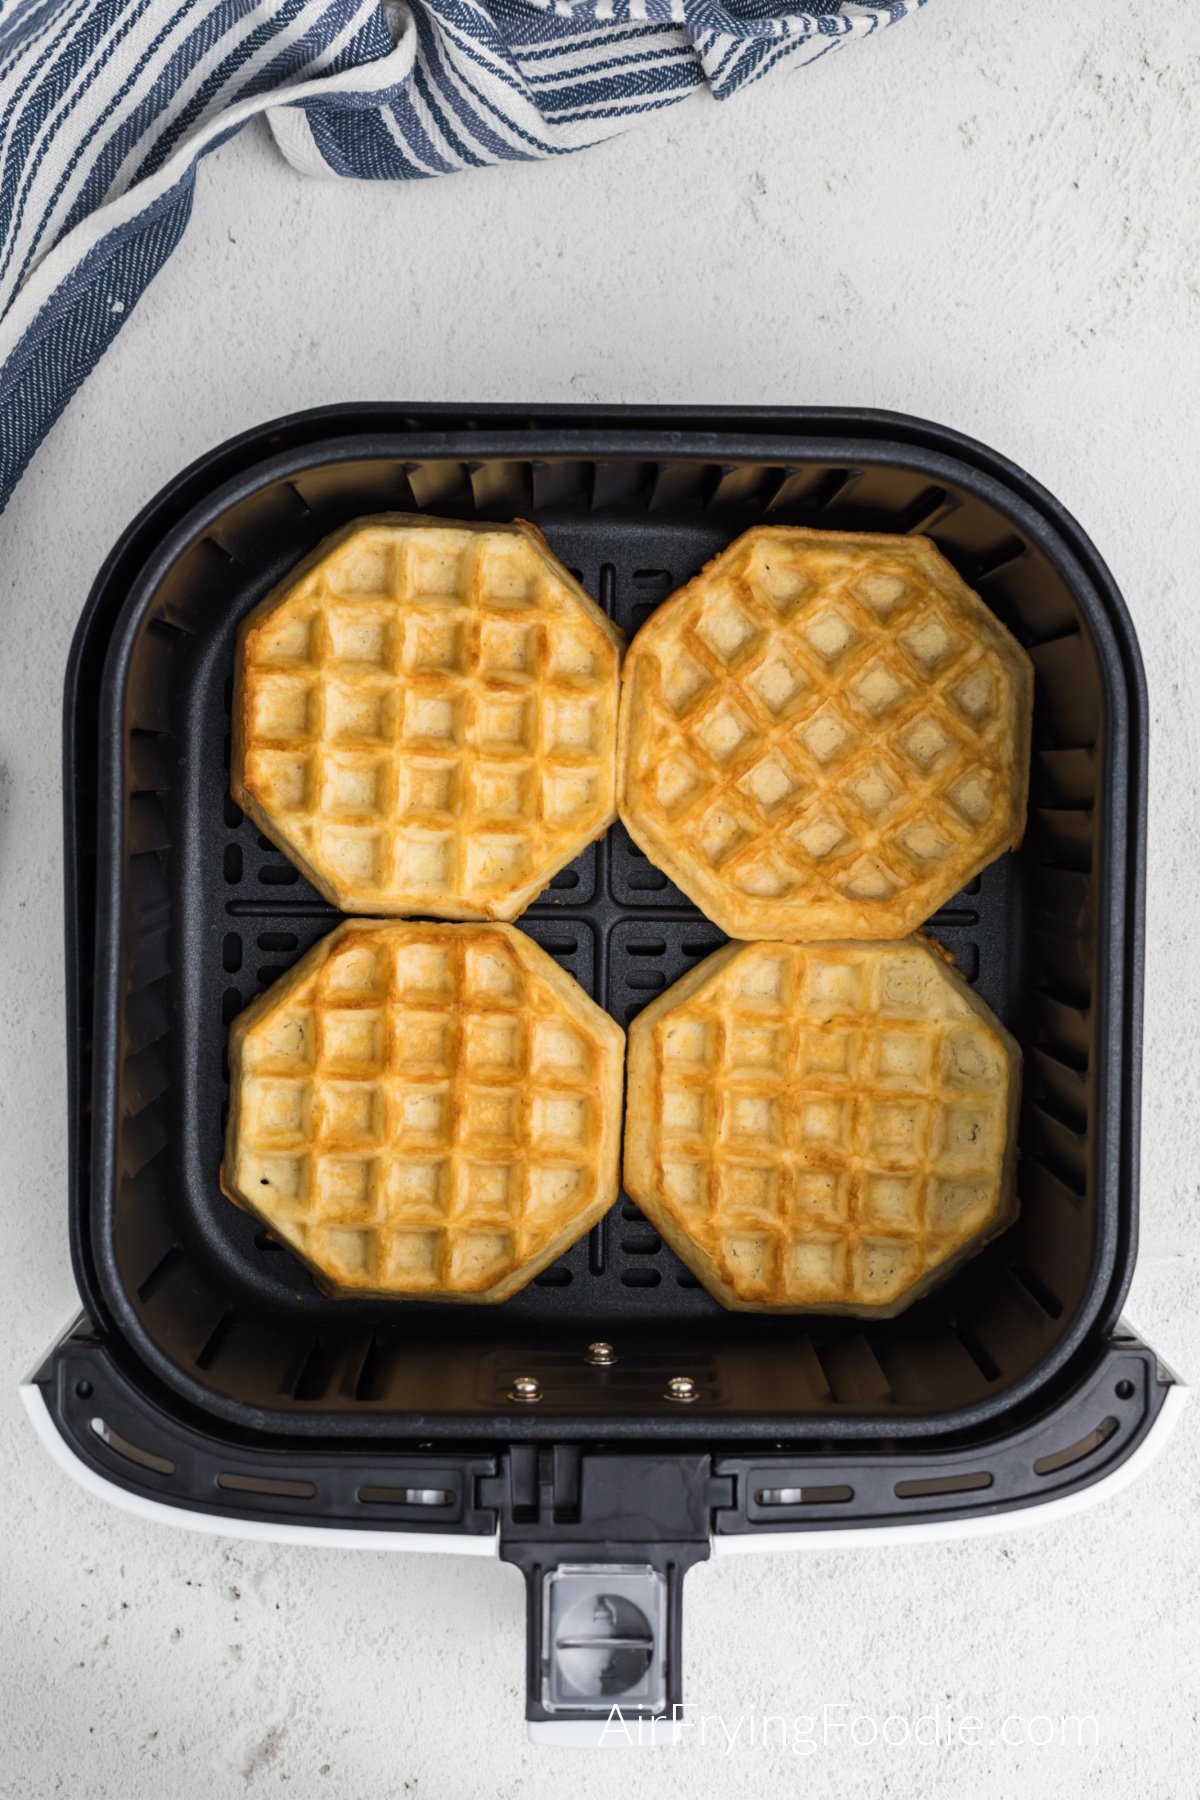 Air fried frozen waffles, fully cooked and ready to serve.